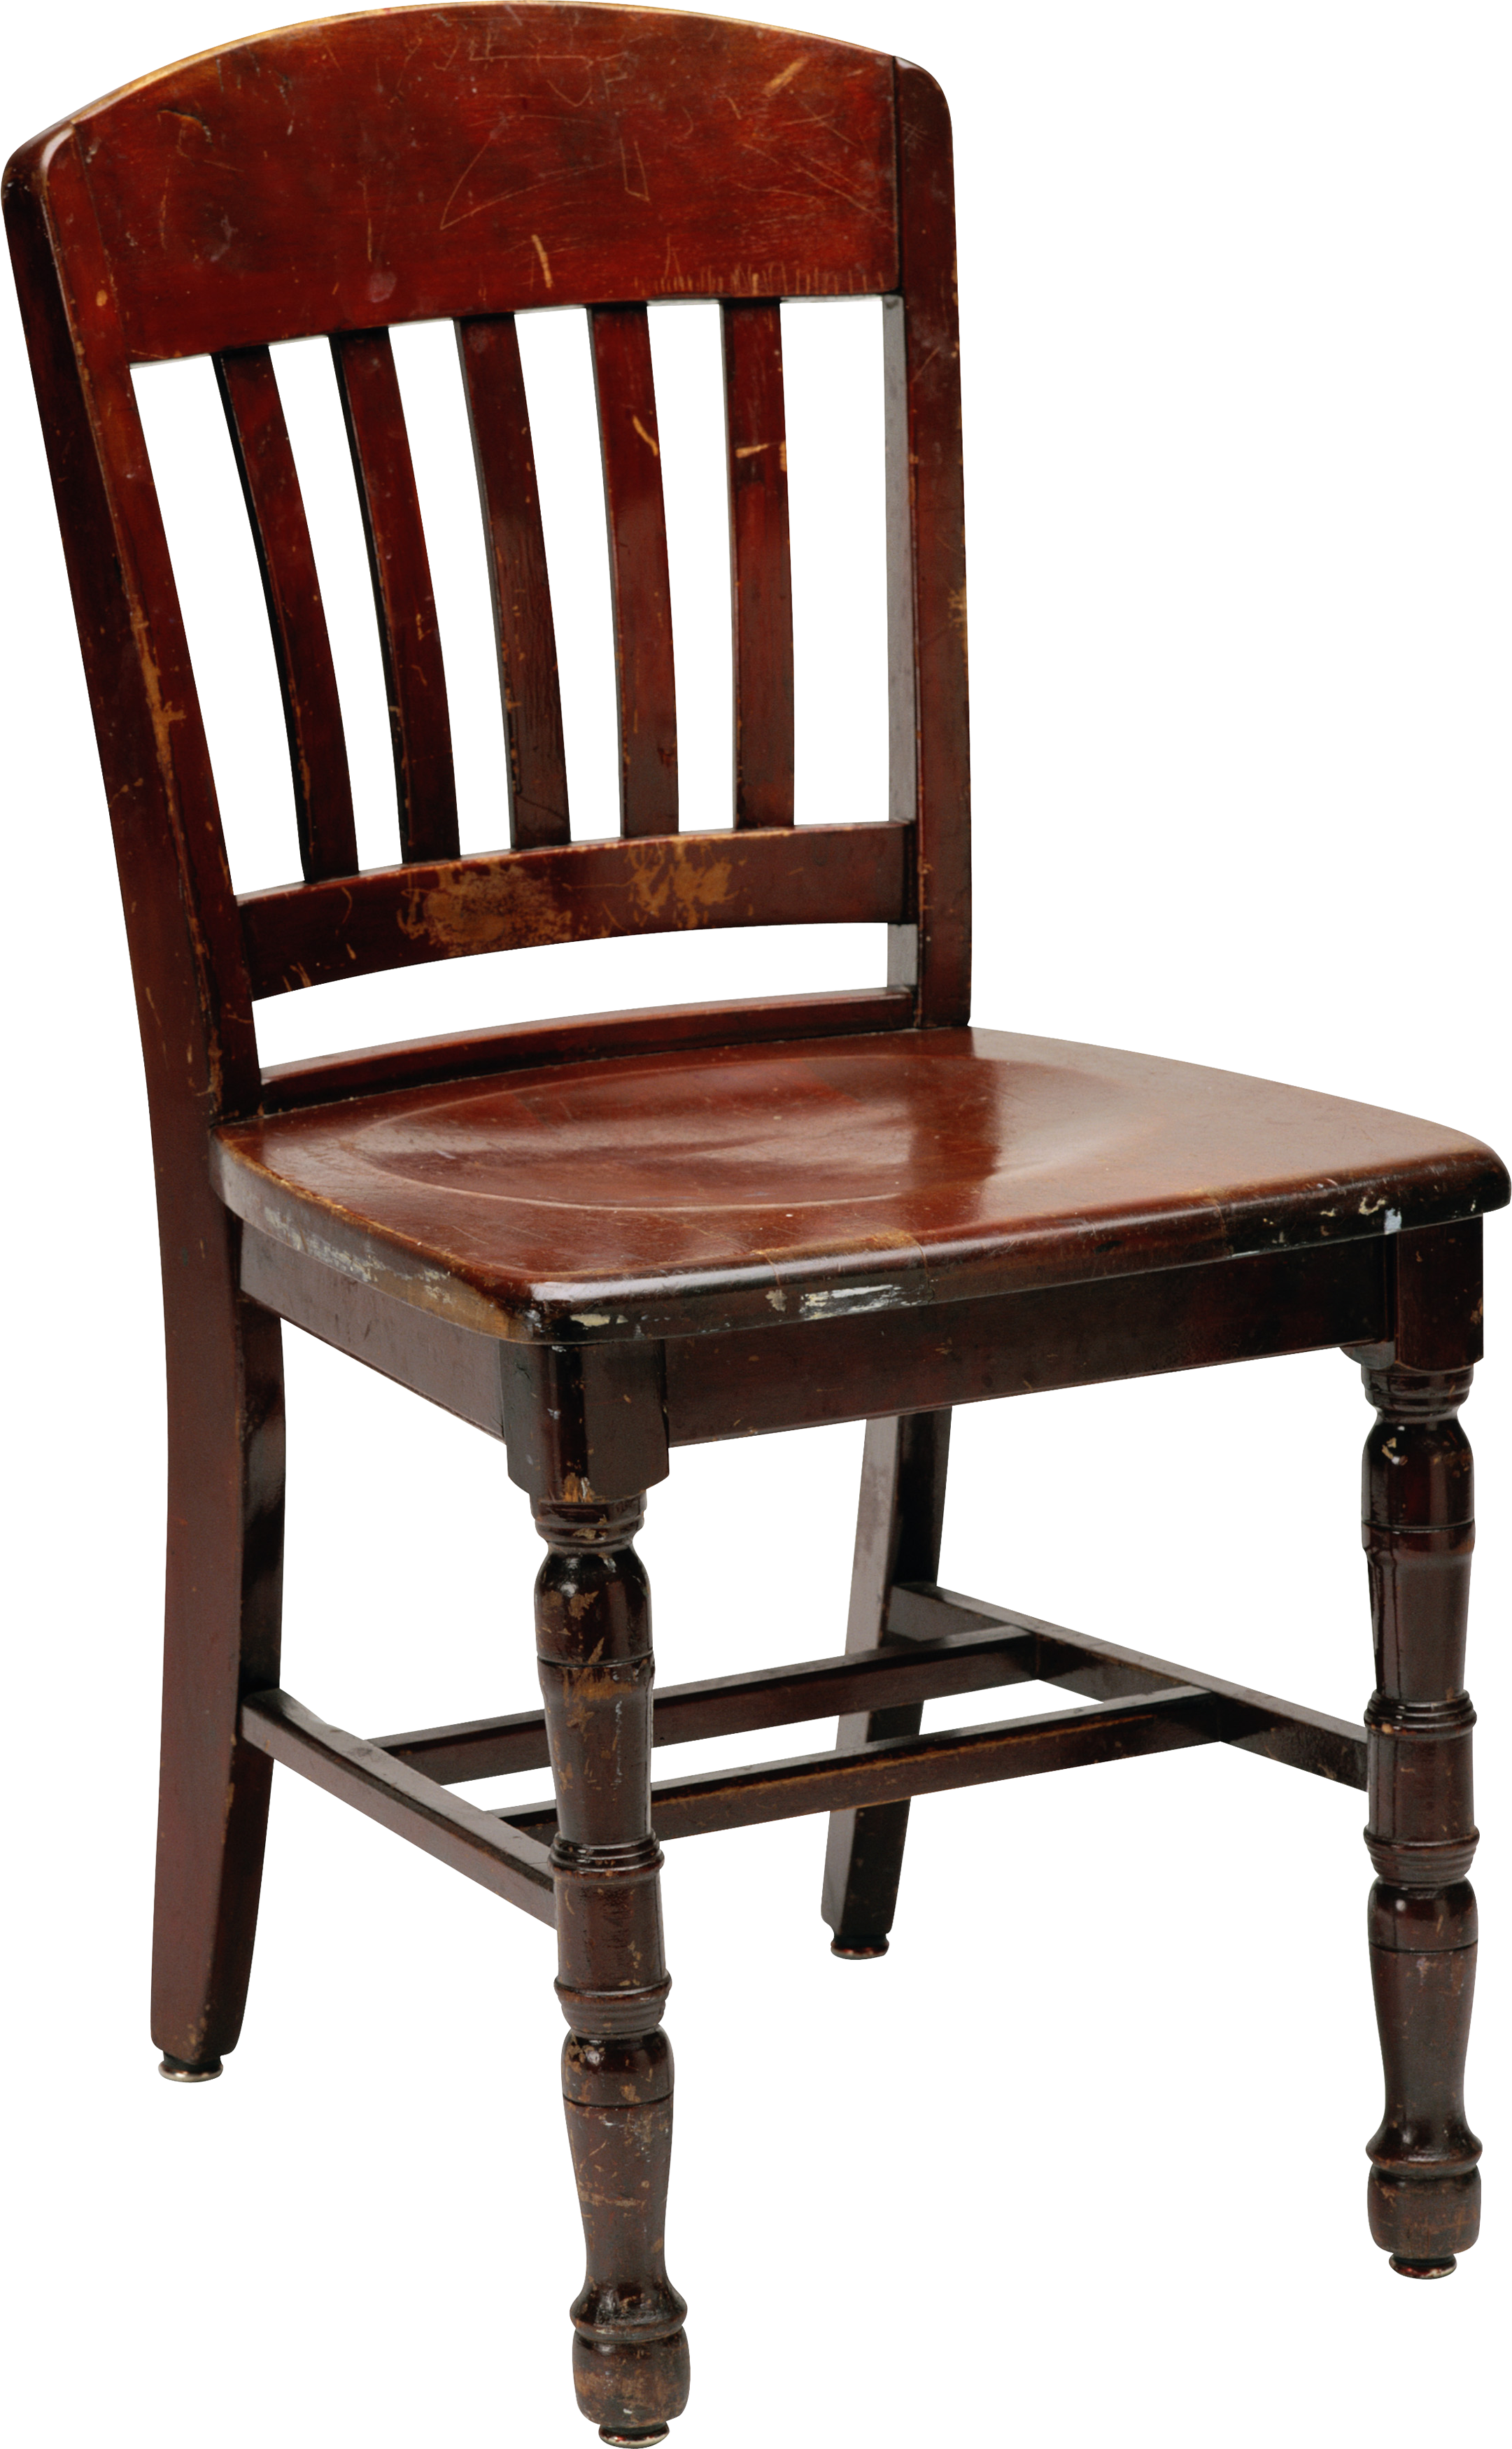 Chair PNG images free download.